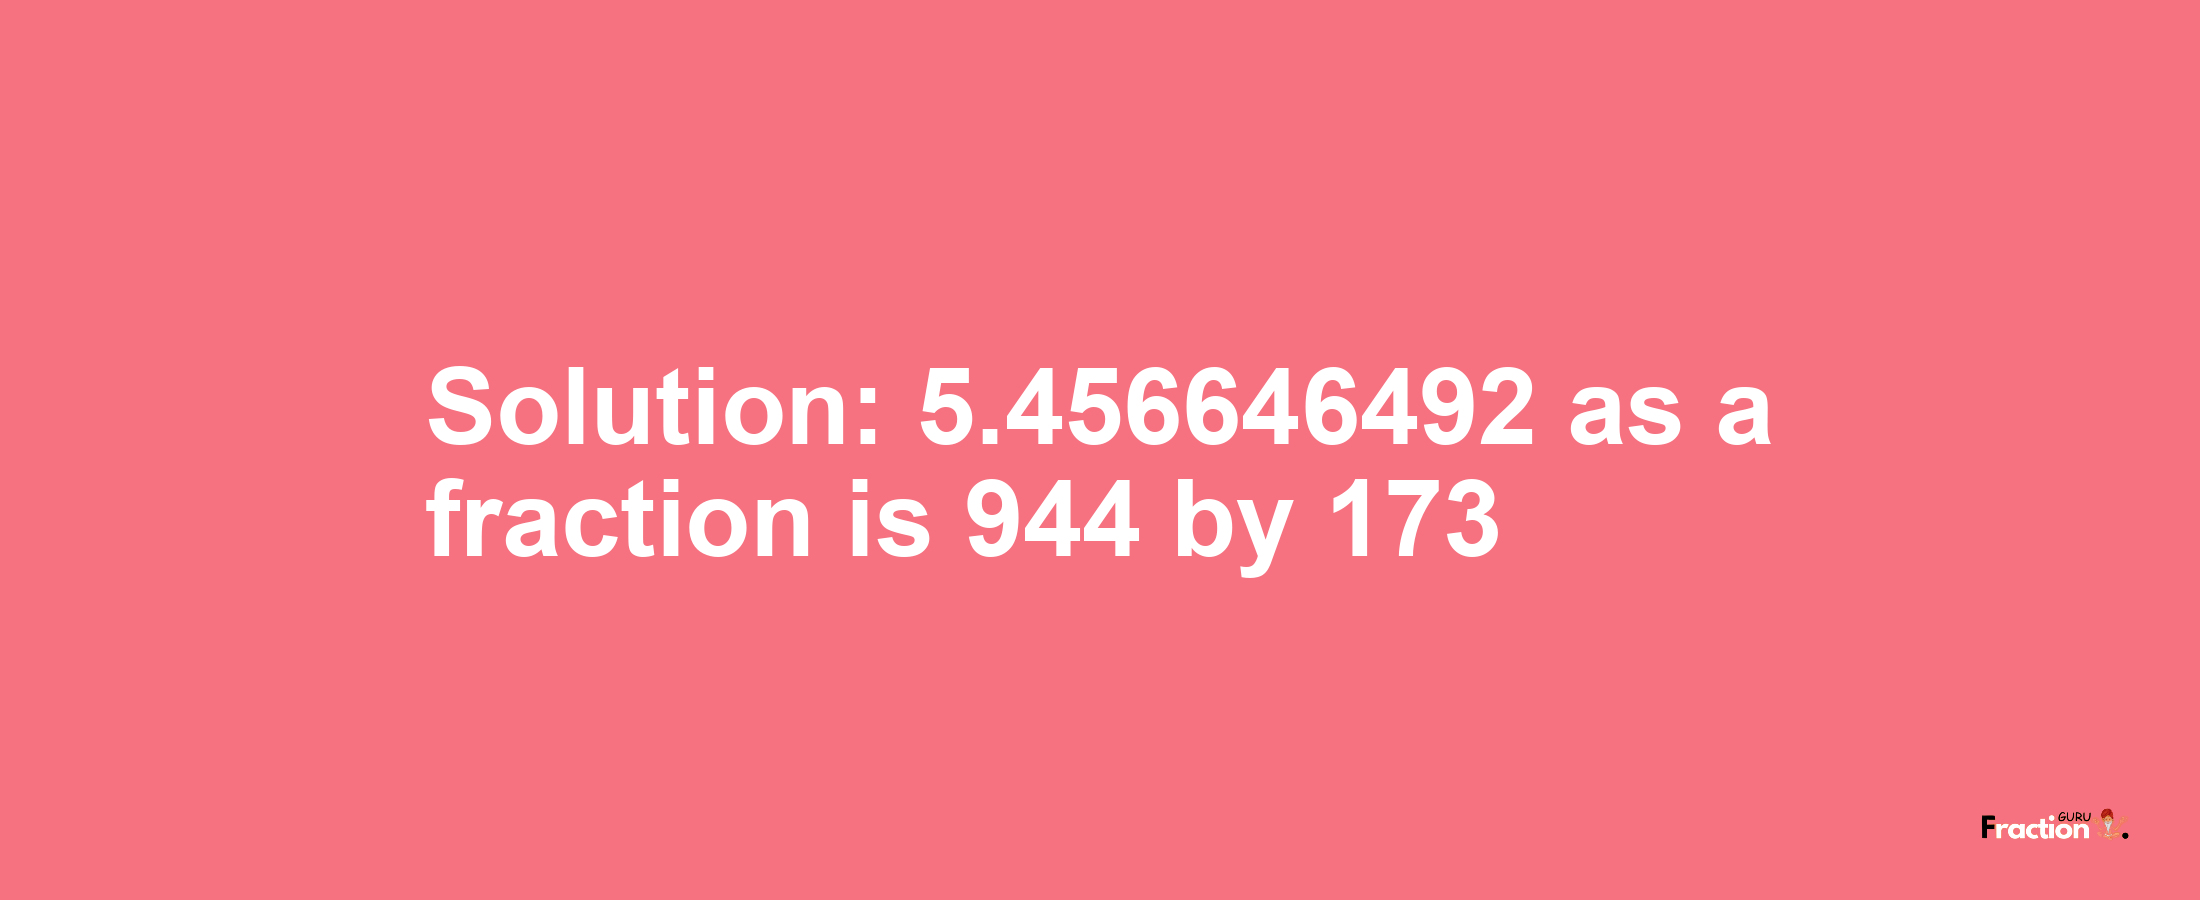 Solution:5.456646492 as a fraction is 944/173